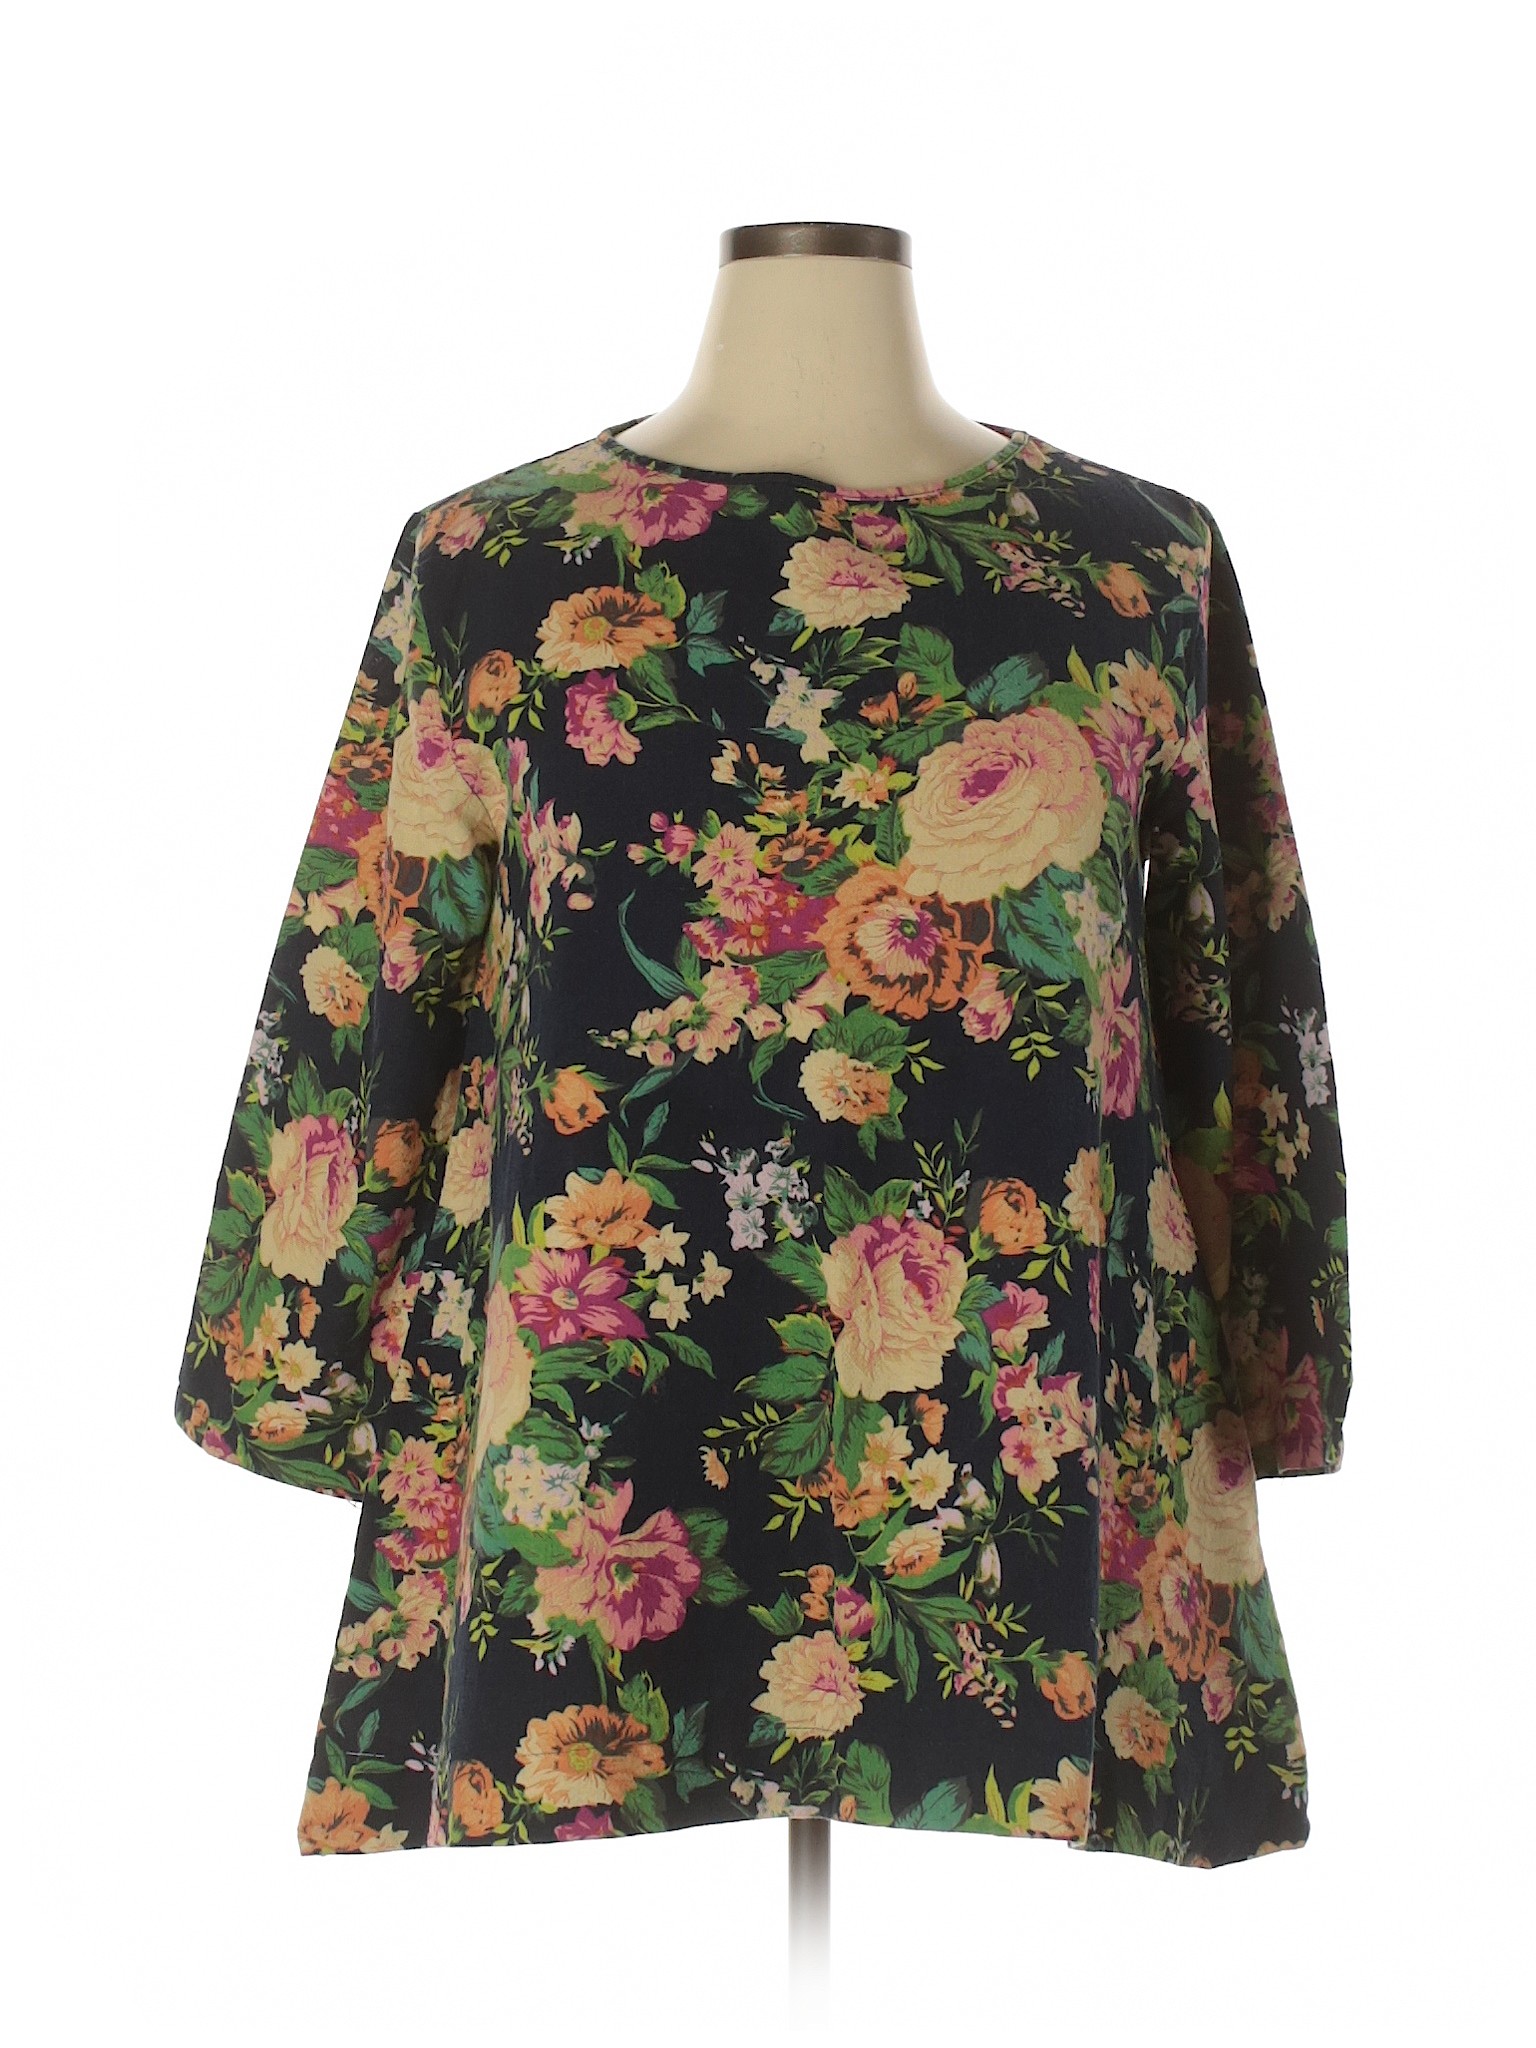 Zanzea Collection Floral Green Blue 3/4 Sleeve Blouse Size XL - 66% off ...